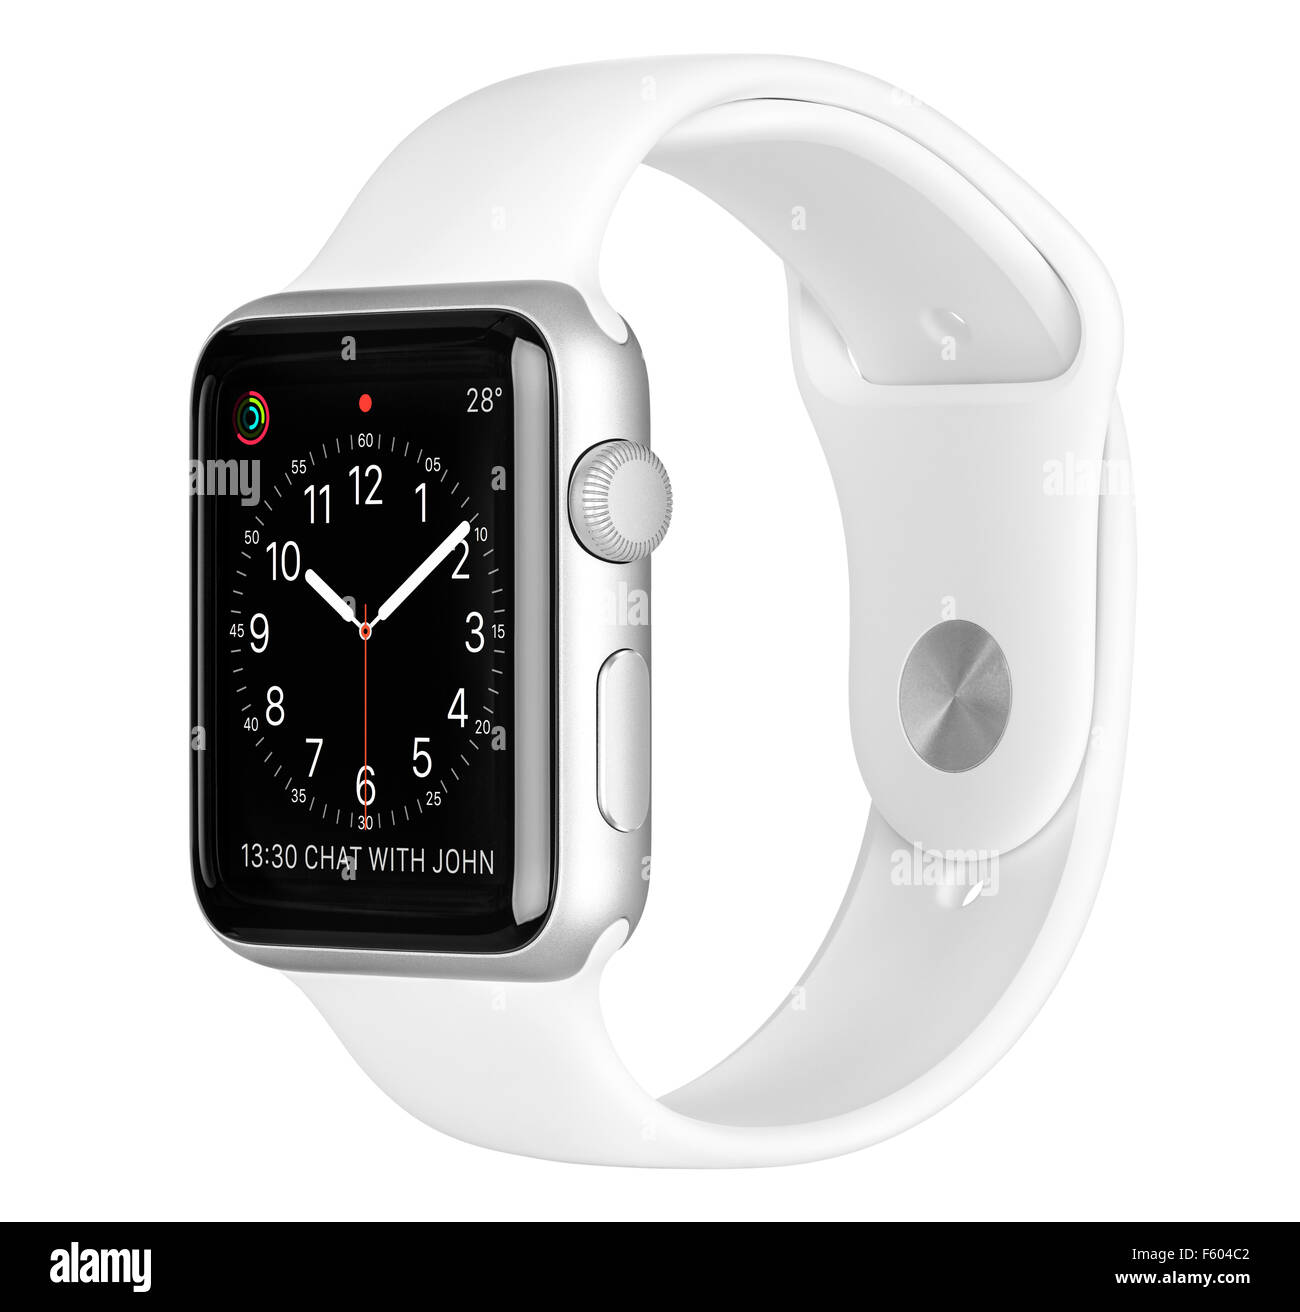 Varna, Bulgaria - October 16, 2015: Apple Watch Sport 42mm Silver Aluminum Case with White Band with clock face on the display. Stock Photo